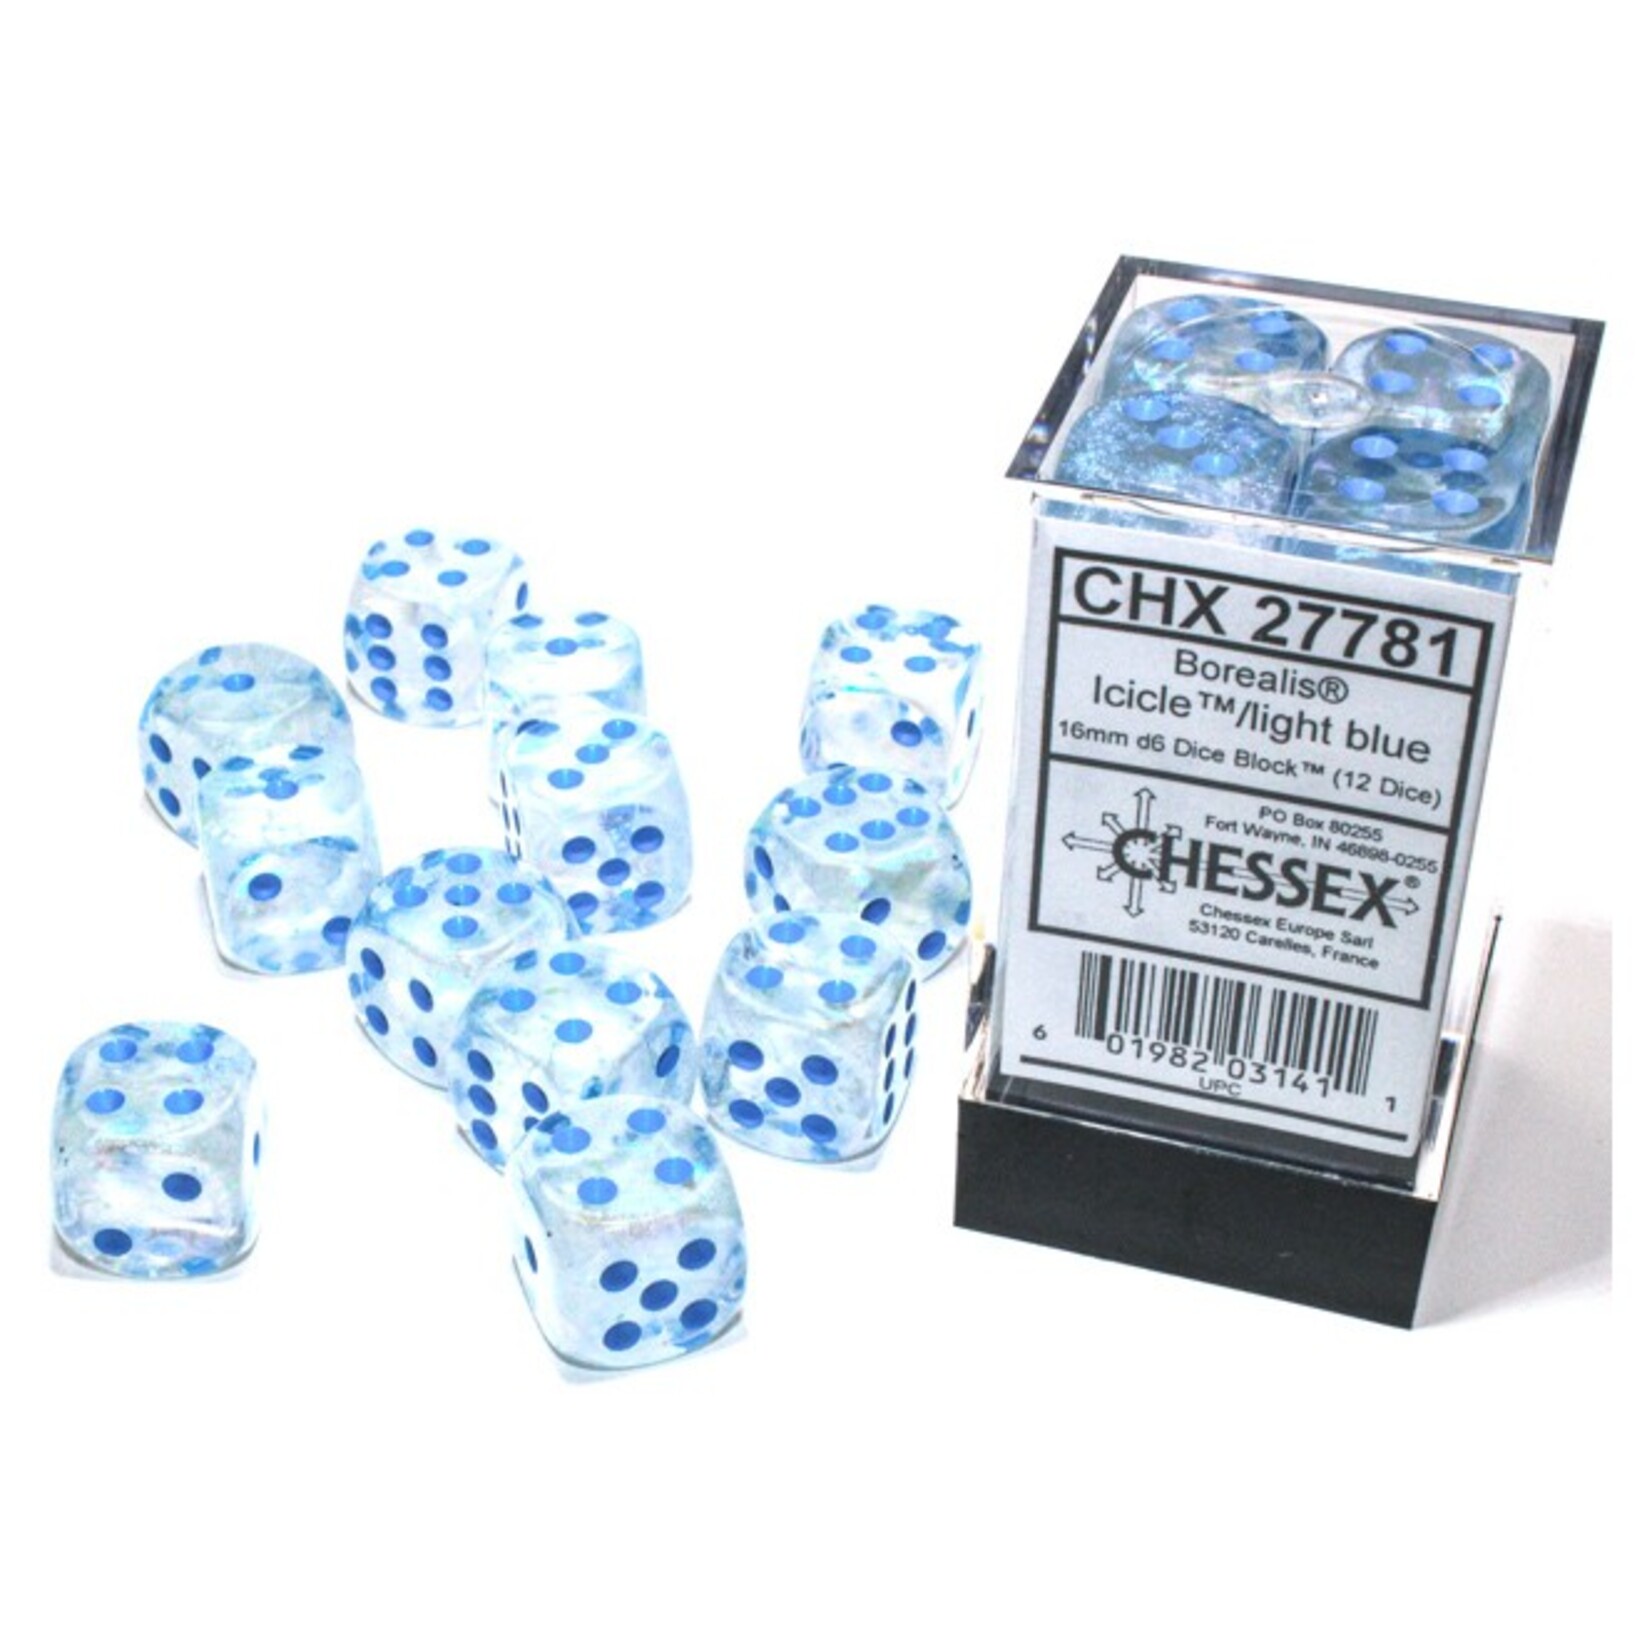 Chessex Chessex Borealis Icicle with Light Blue Luminary 16 mm d6 12 die set